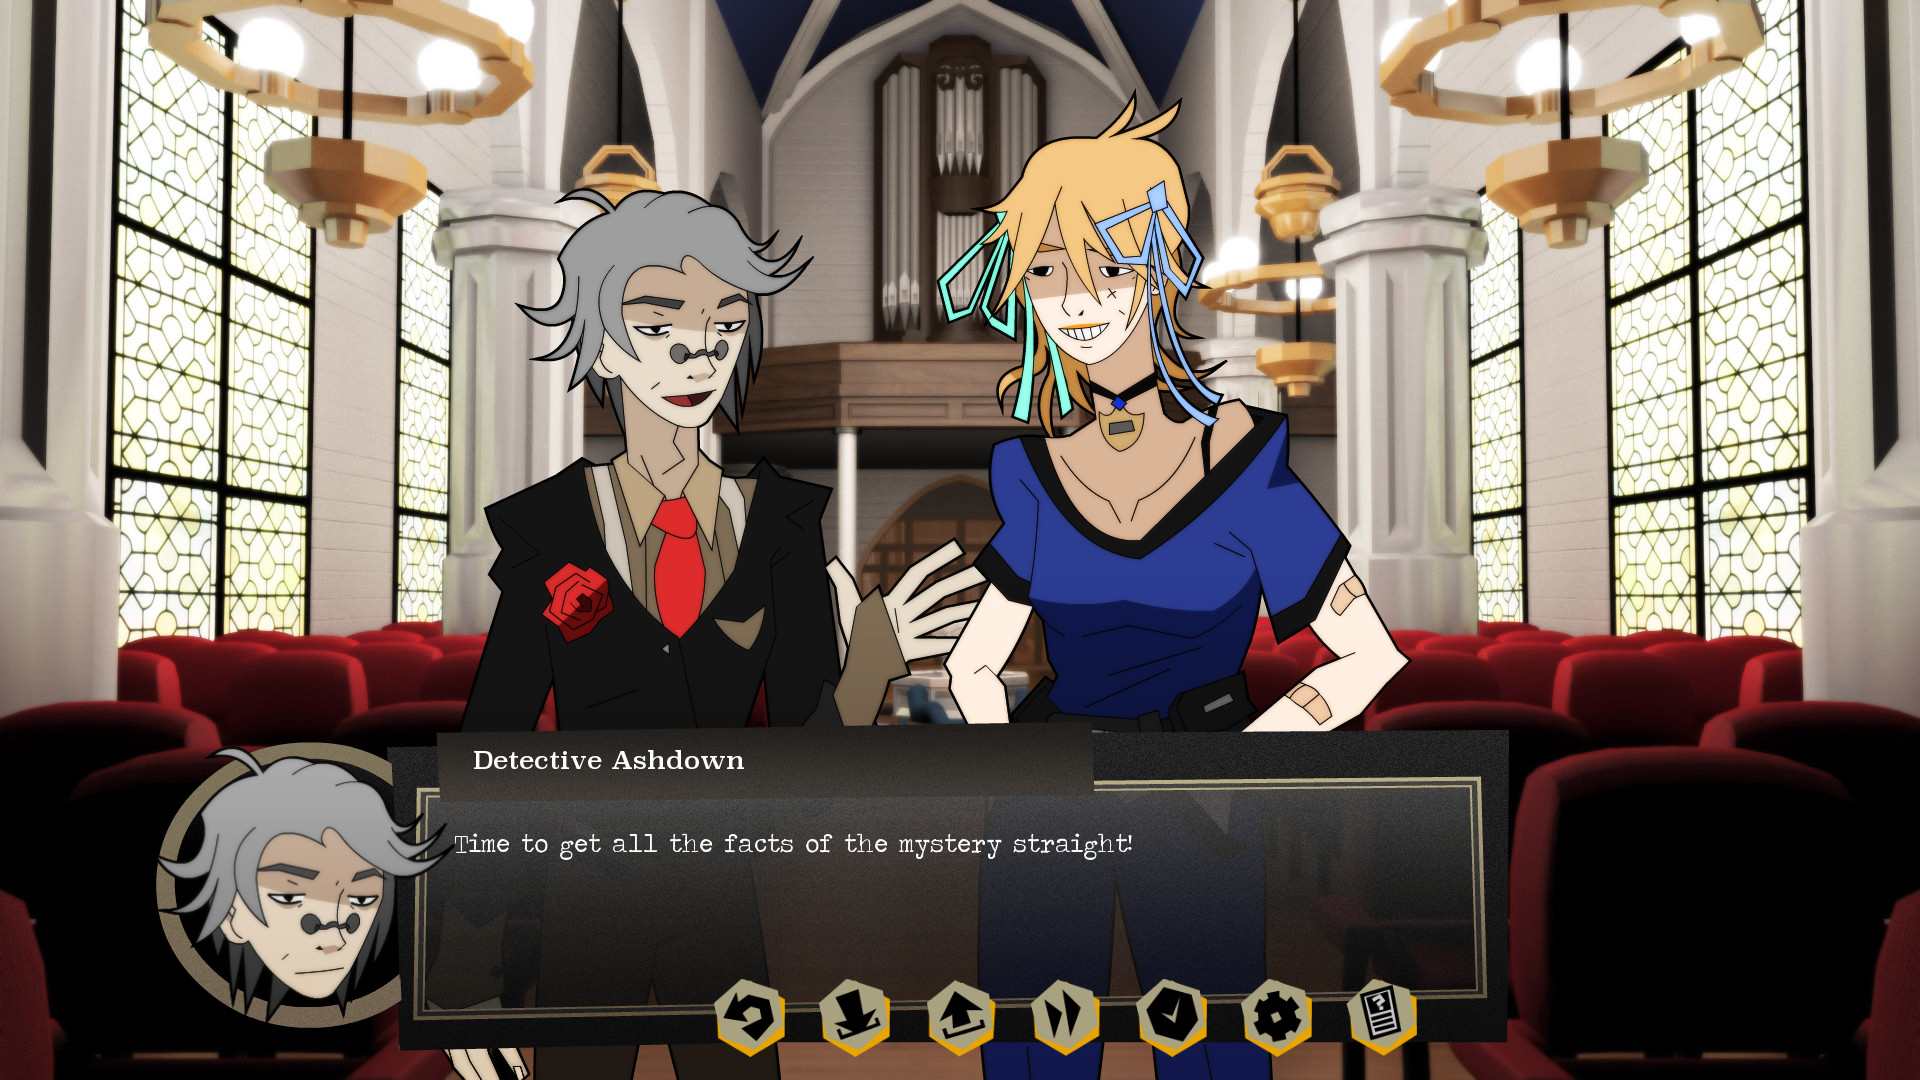 Methods: The Detective Competition screenshot